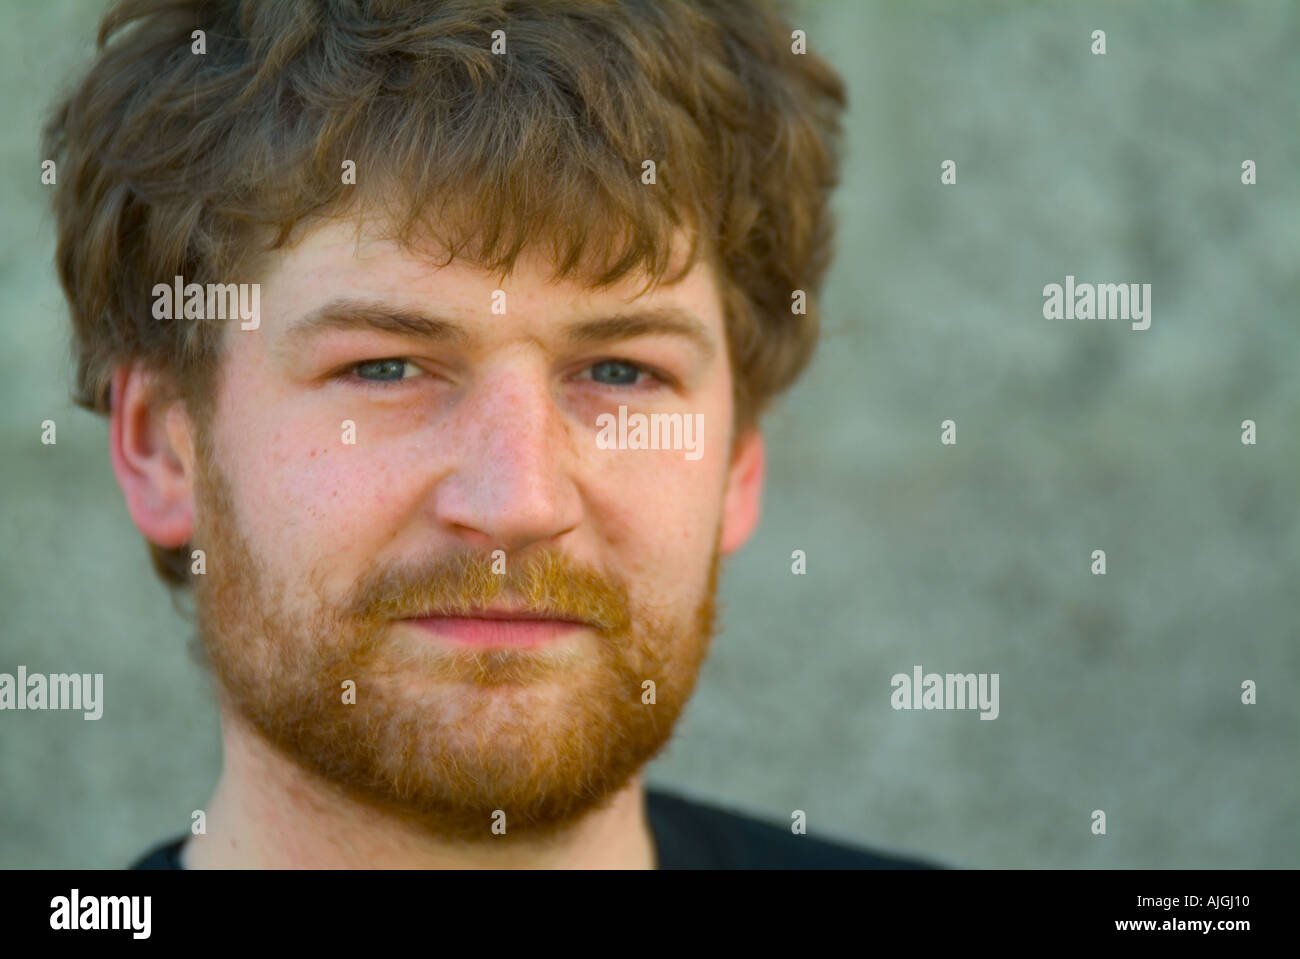 portrait of a scruffy unkept young man with beard and unkept hair Stock Photo